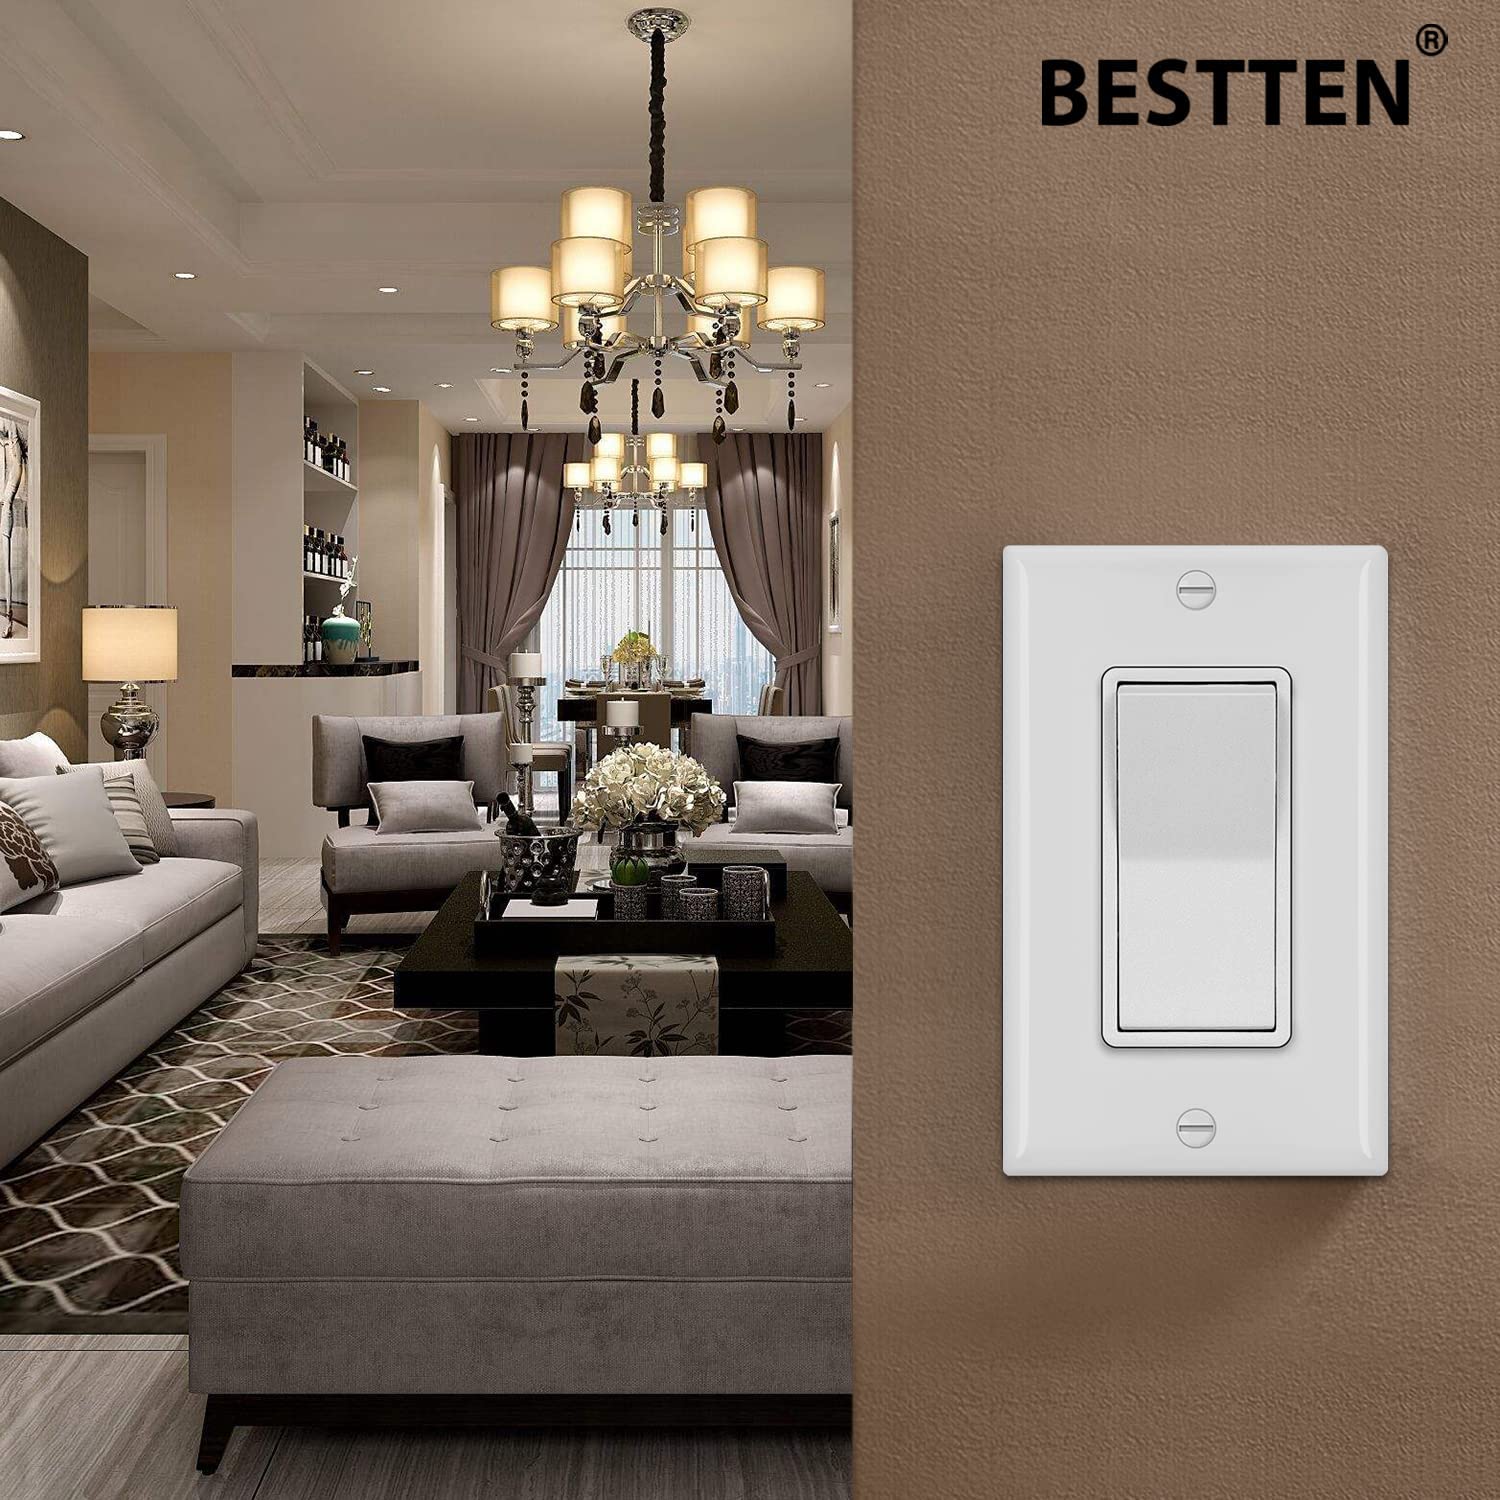 [10 Pack] BESTTEN Single Pole Decorator Wall Light Switch with Wallplate, 15A 120/277V, On/Off Rocker Paddle Interrupter for LED and other Lamps, UL Listed, White - image 2 of 7